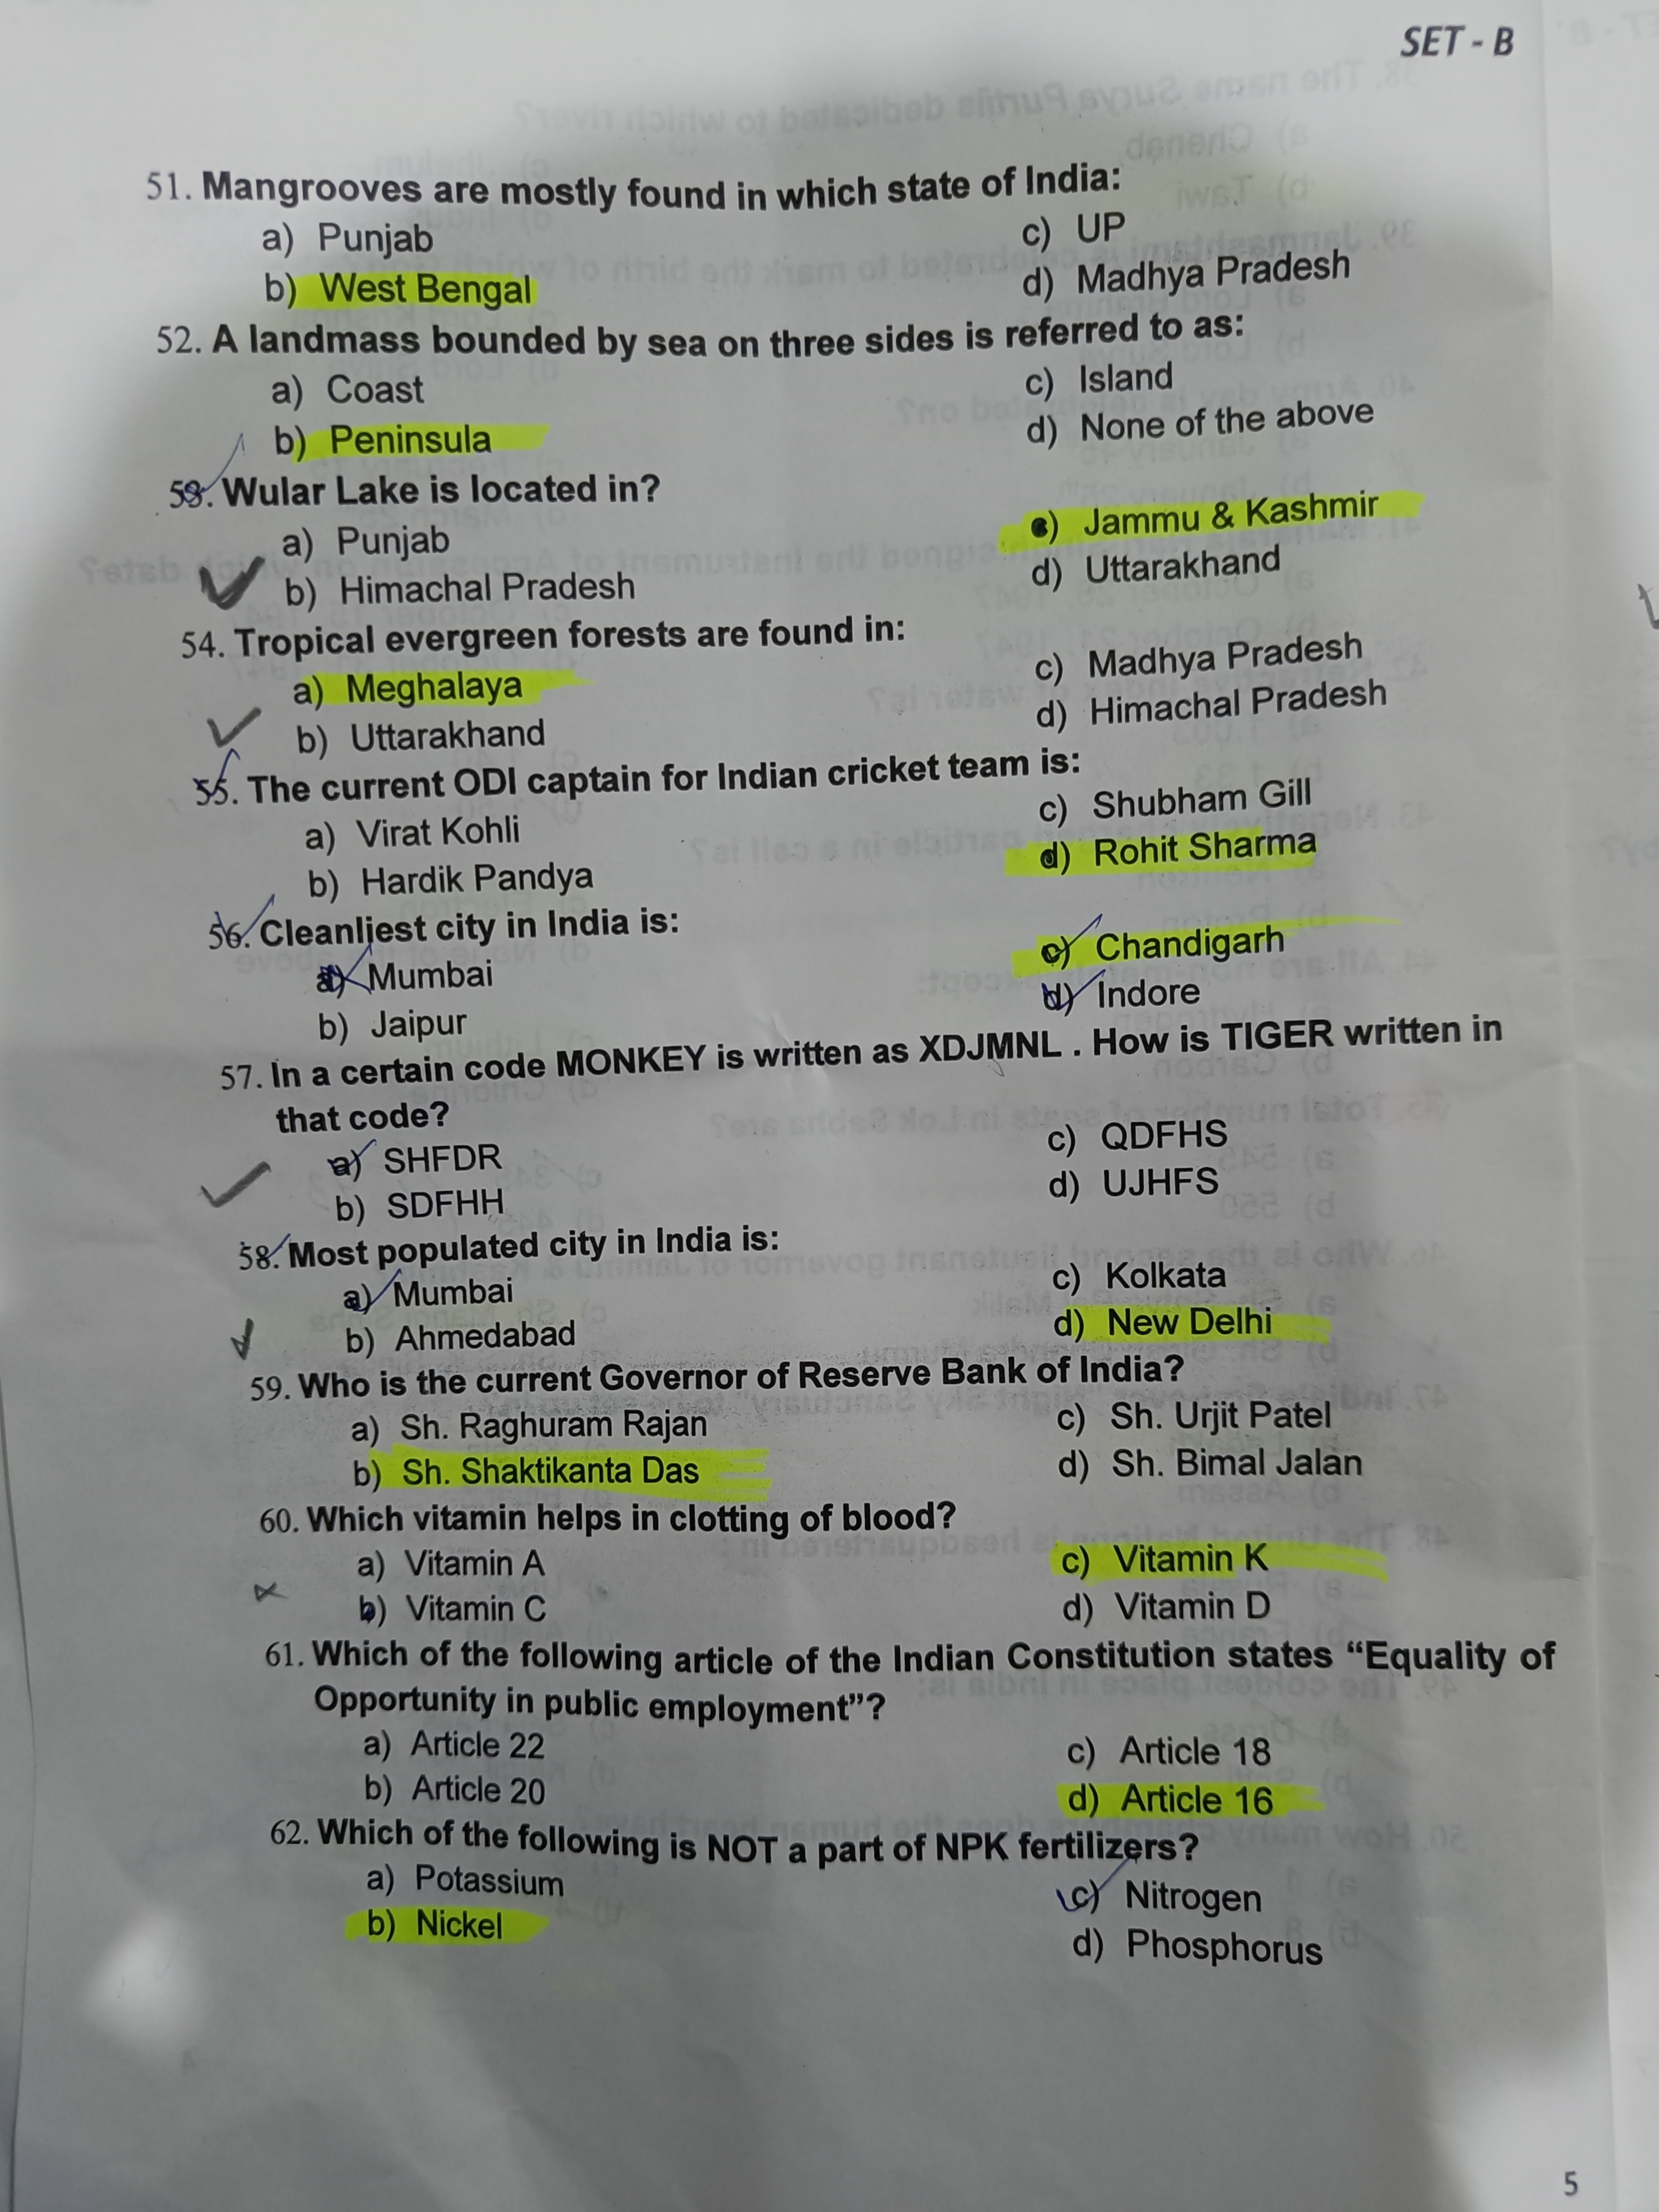 JK Border Battalion Answer key and Question Paper, Uploaded here 8